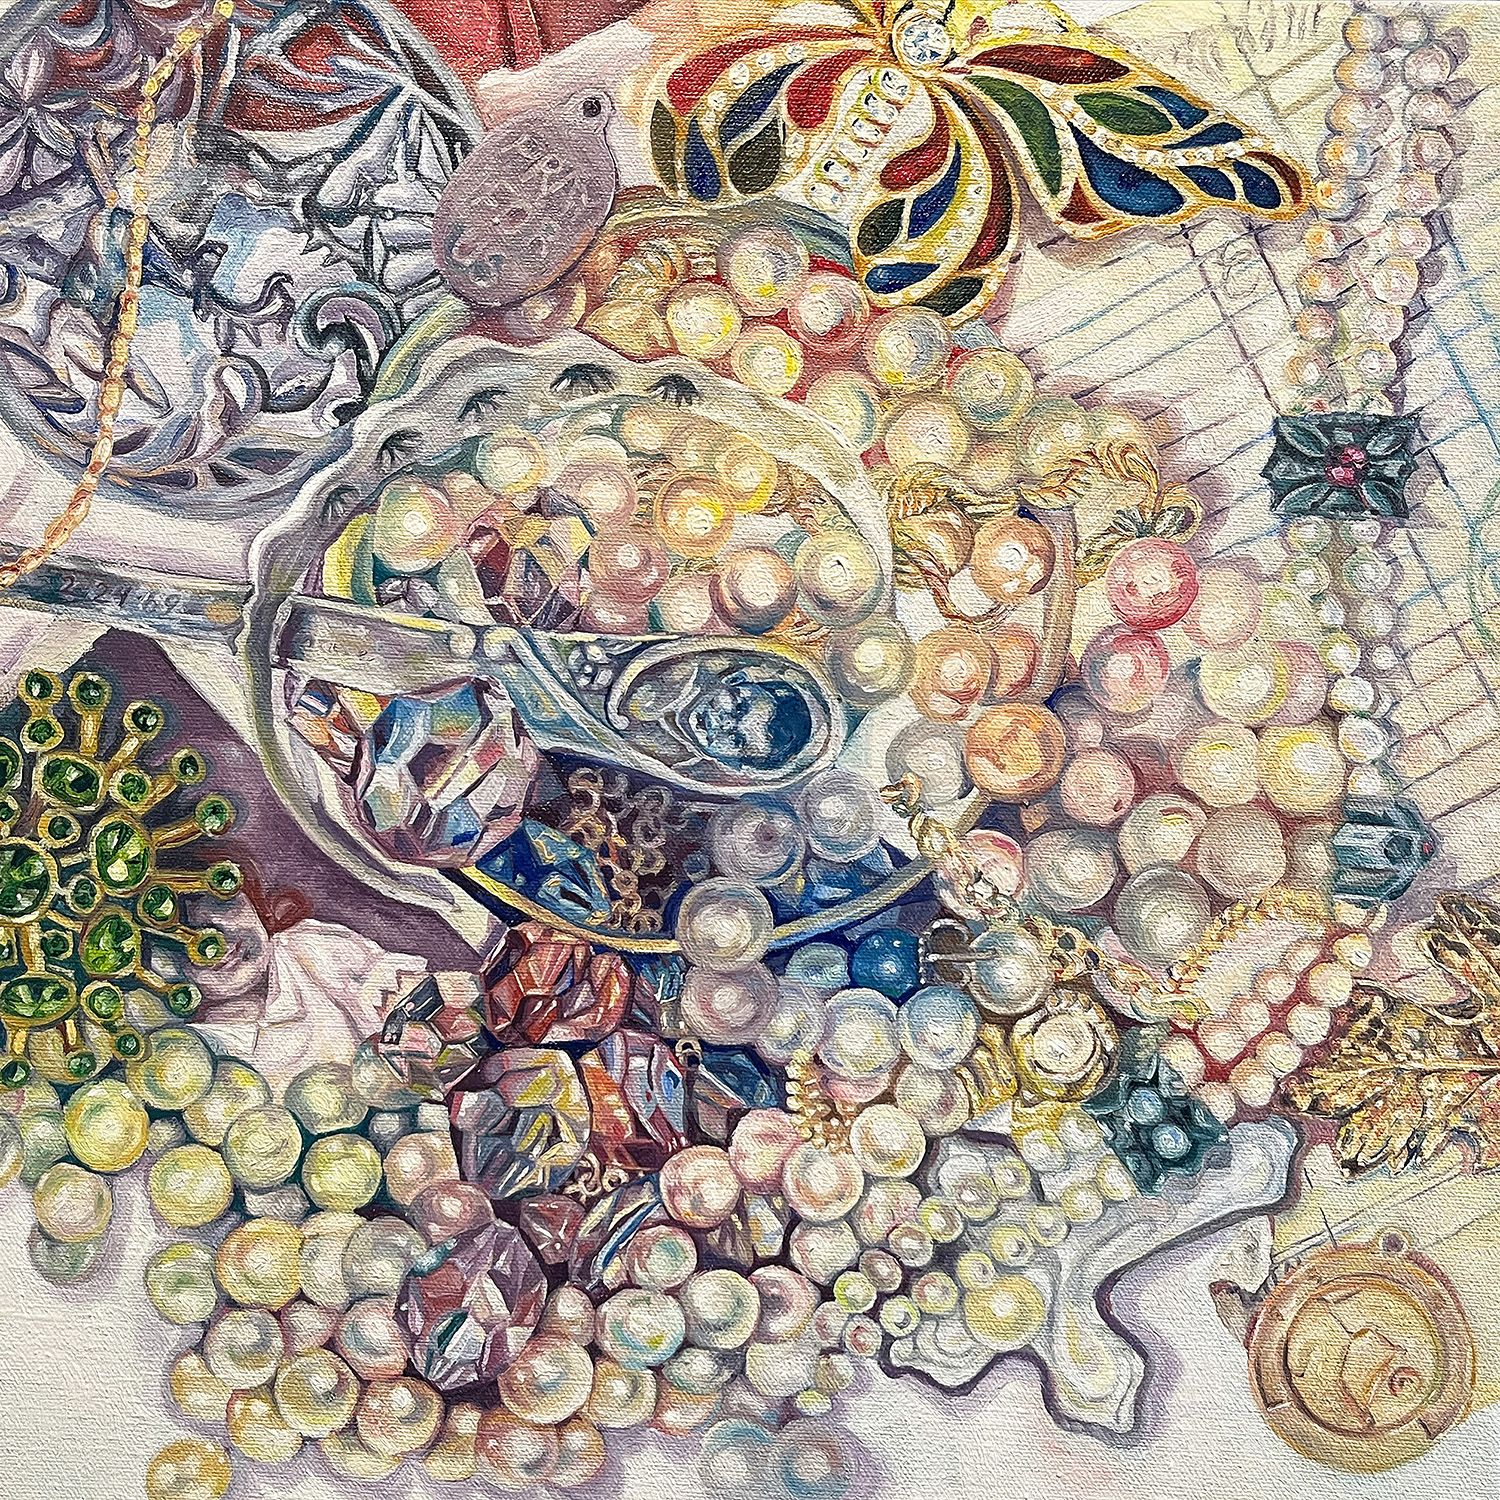 Realistic oil painting of a pile of glimmering jewelry with pearls.